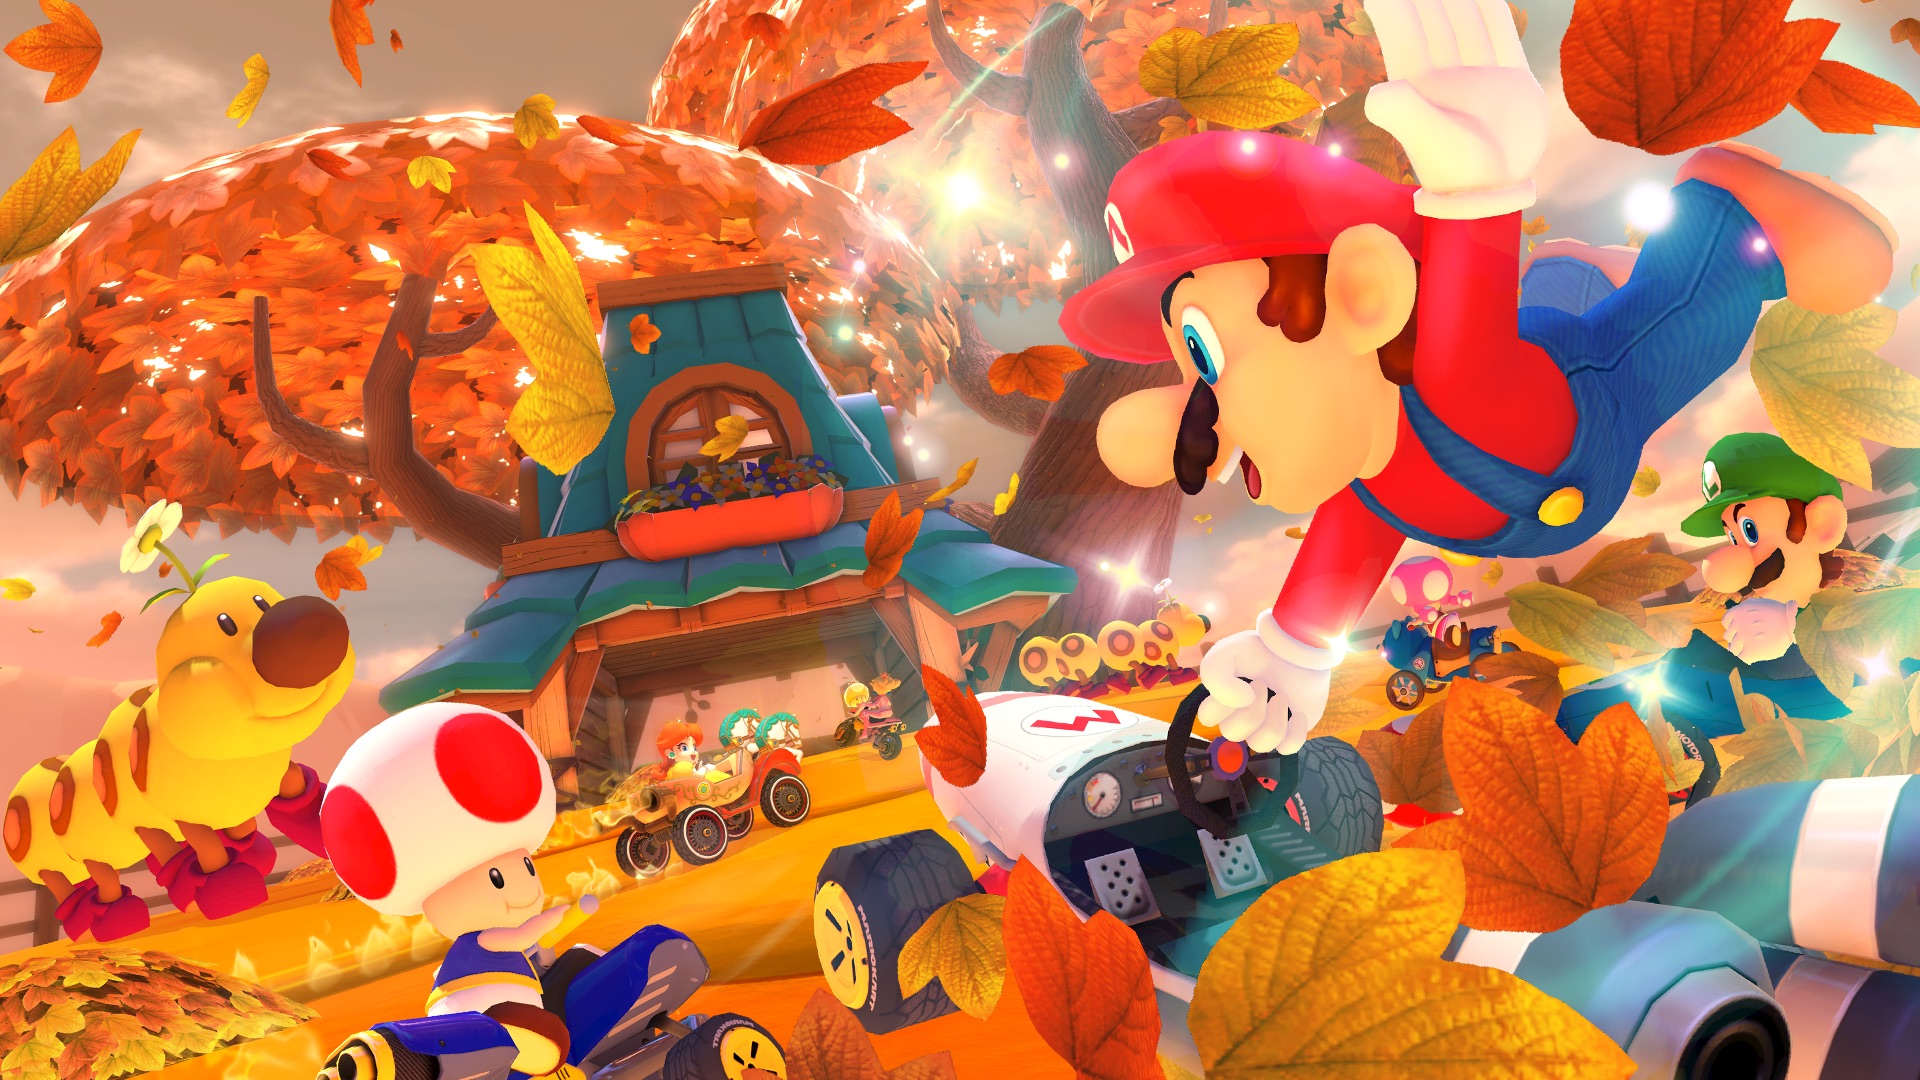 Mario pulls off a stunt on his kart while Toad, Luigi, and Daisy (and a Wiggler) look on in a screenshot of Mario Kart 8 Deluxe’s version of the Maple Treeway course